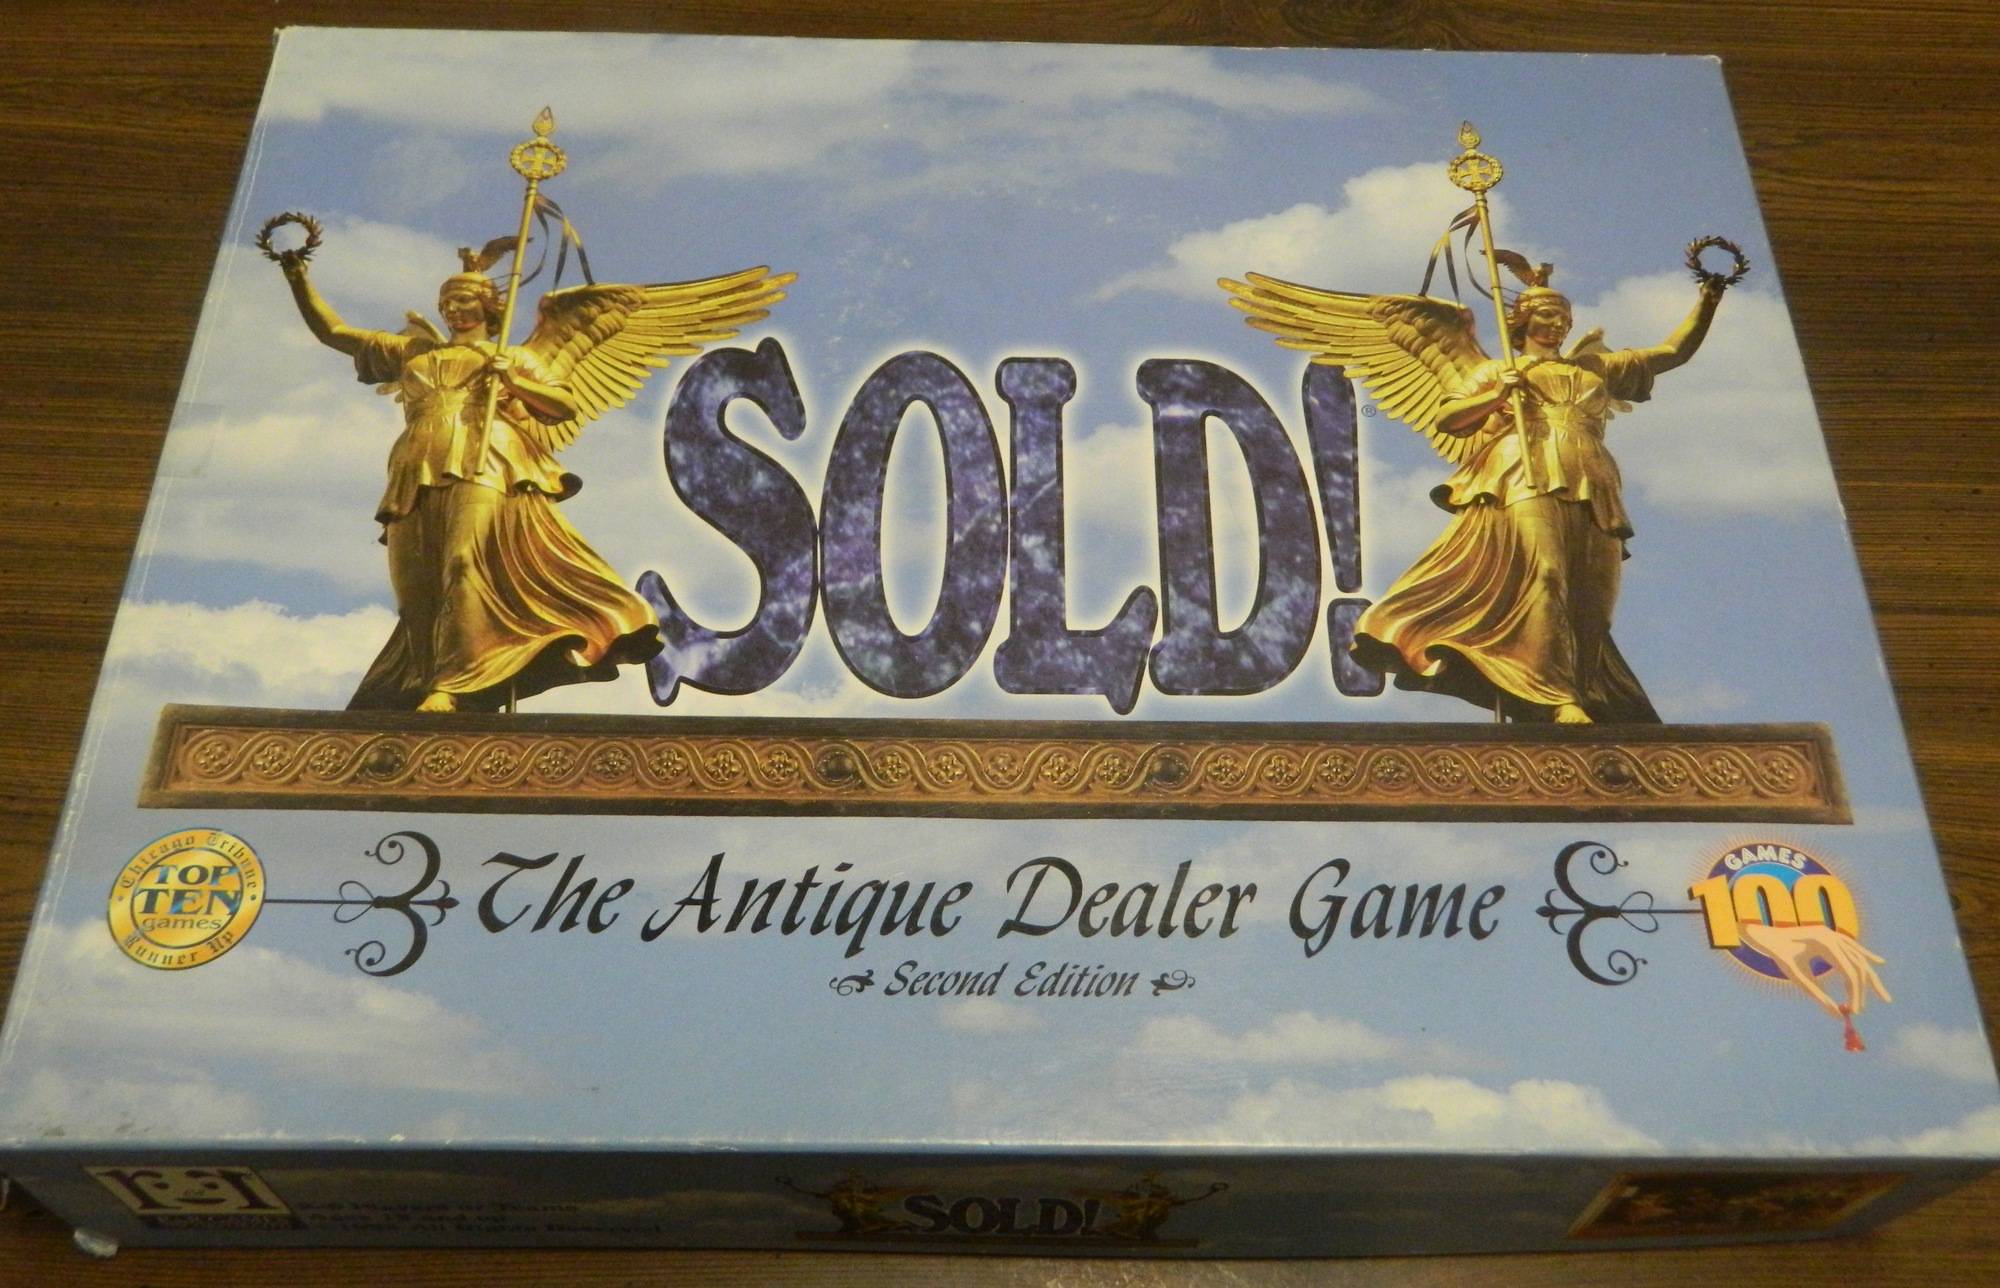 Sold! The Antique Dealer Game Board Game Review and Rules